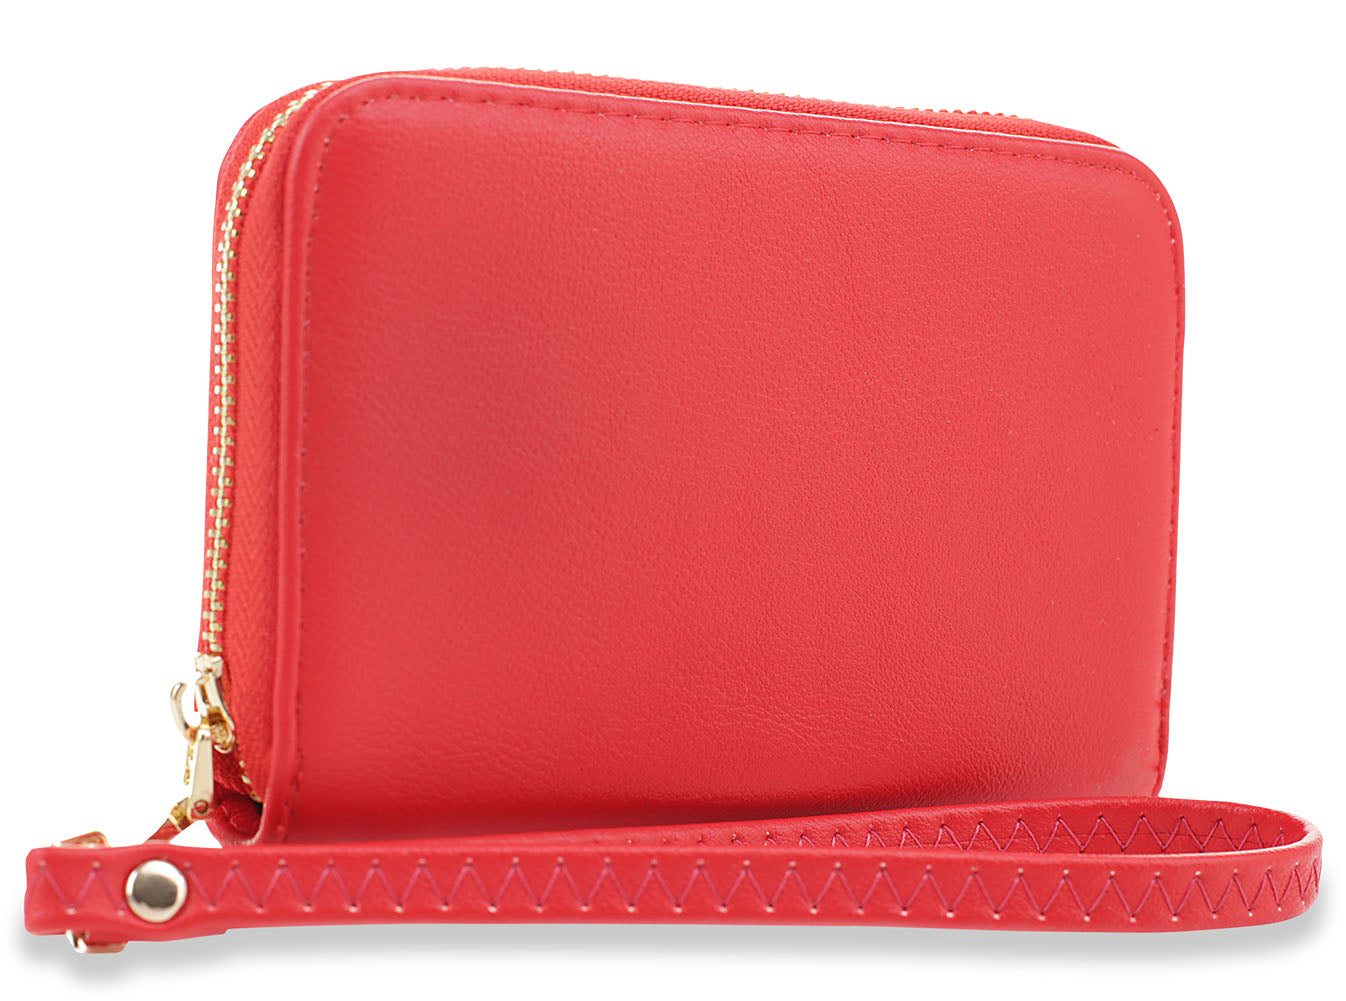 Classic Wristlet Wallet - Red